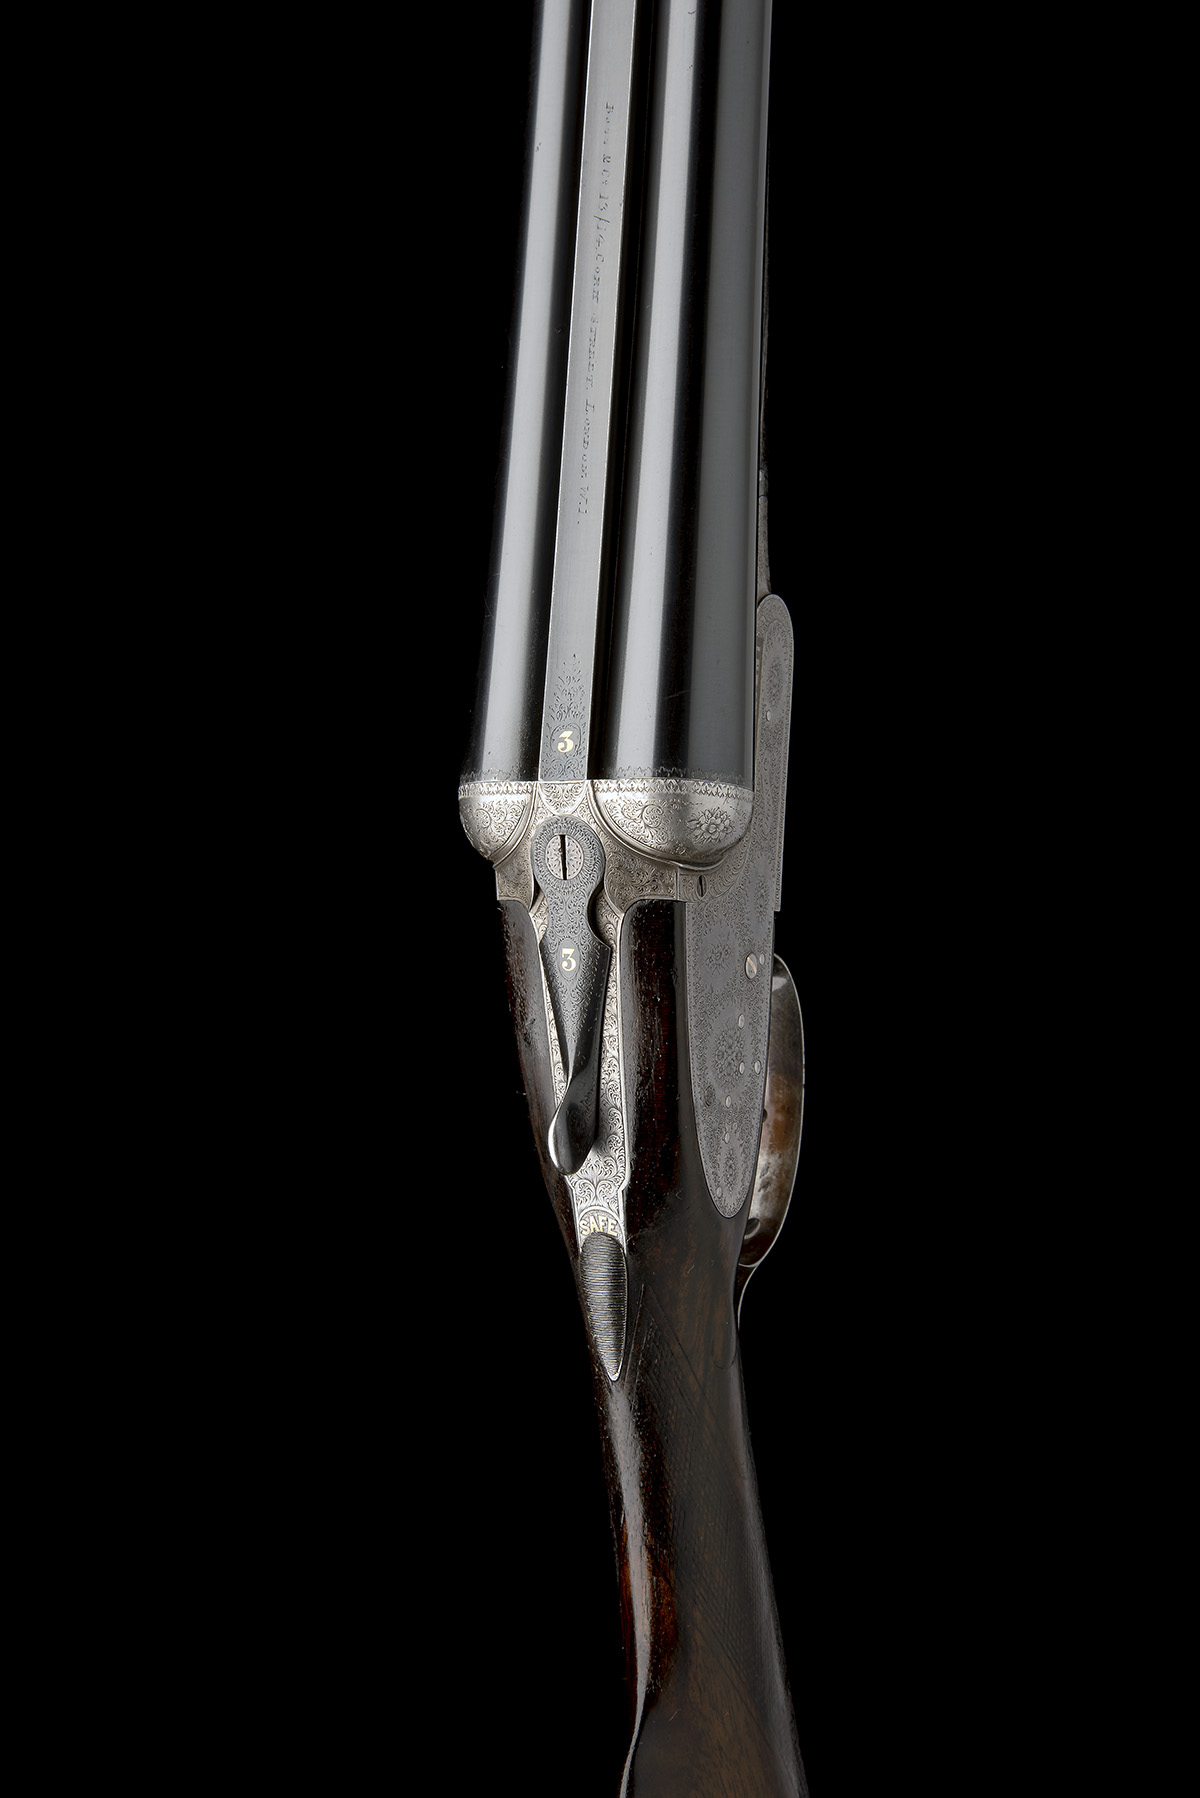 BOSS & CO. A 12-BORE EASY-OPENING SIDELOCK EJECTOR, serial no. 4854, for 1901, 28in. nitro - Image 4 of 8